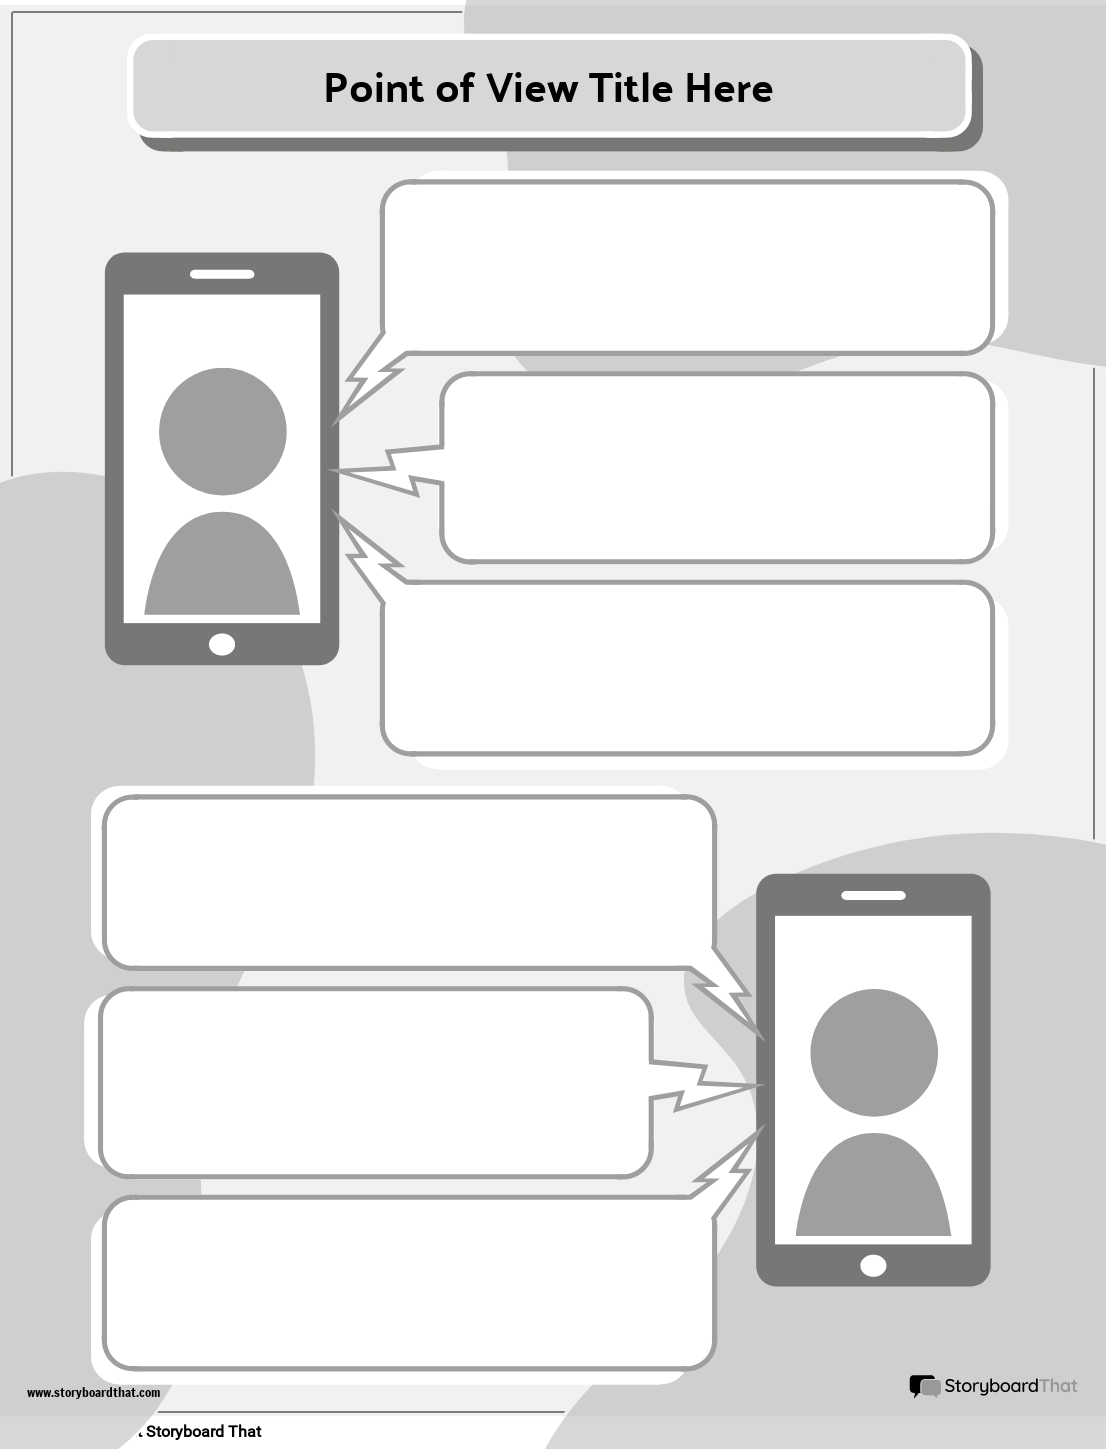 Simple Point of View Template Featuring Cell Phones